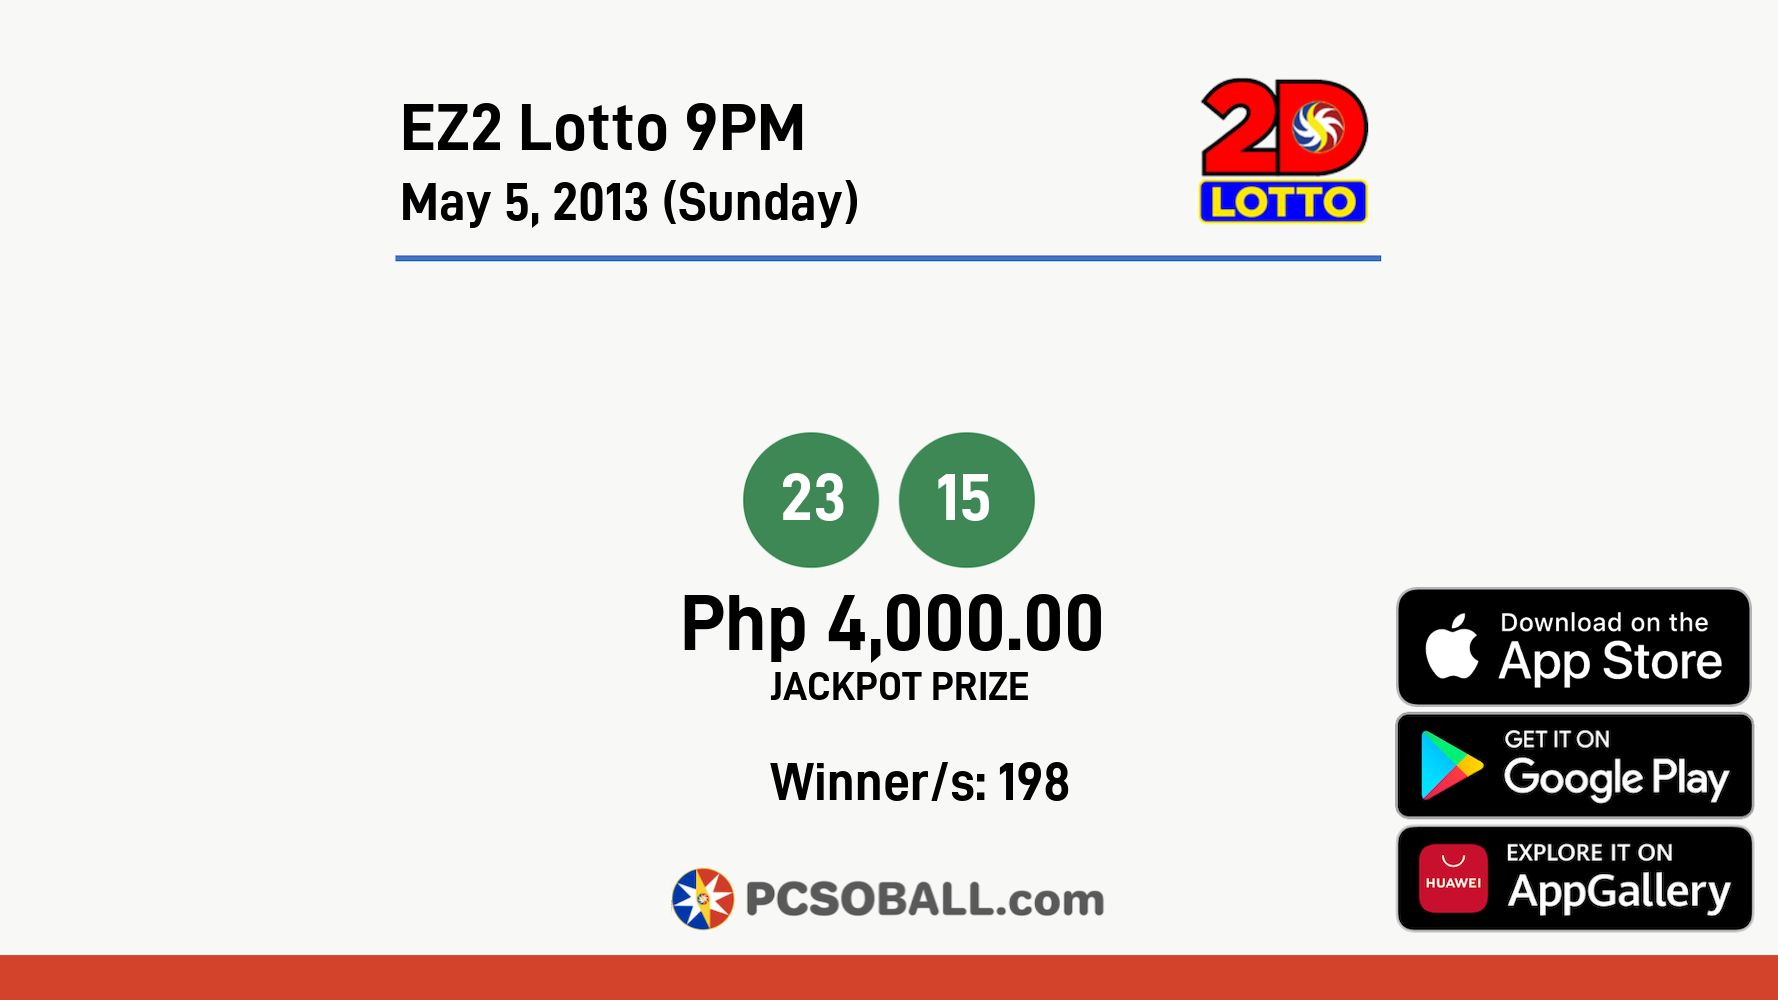 EZ2 Lotto 9PM May 5, 2013 (Sunday) Result